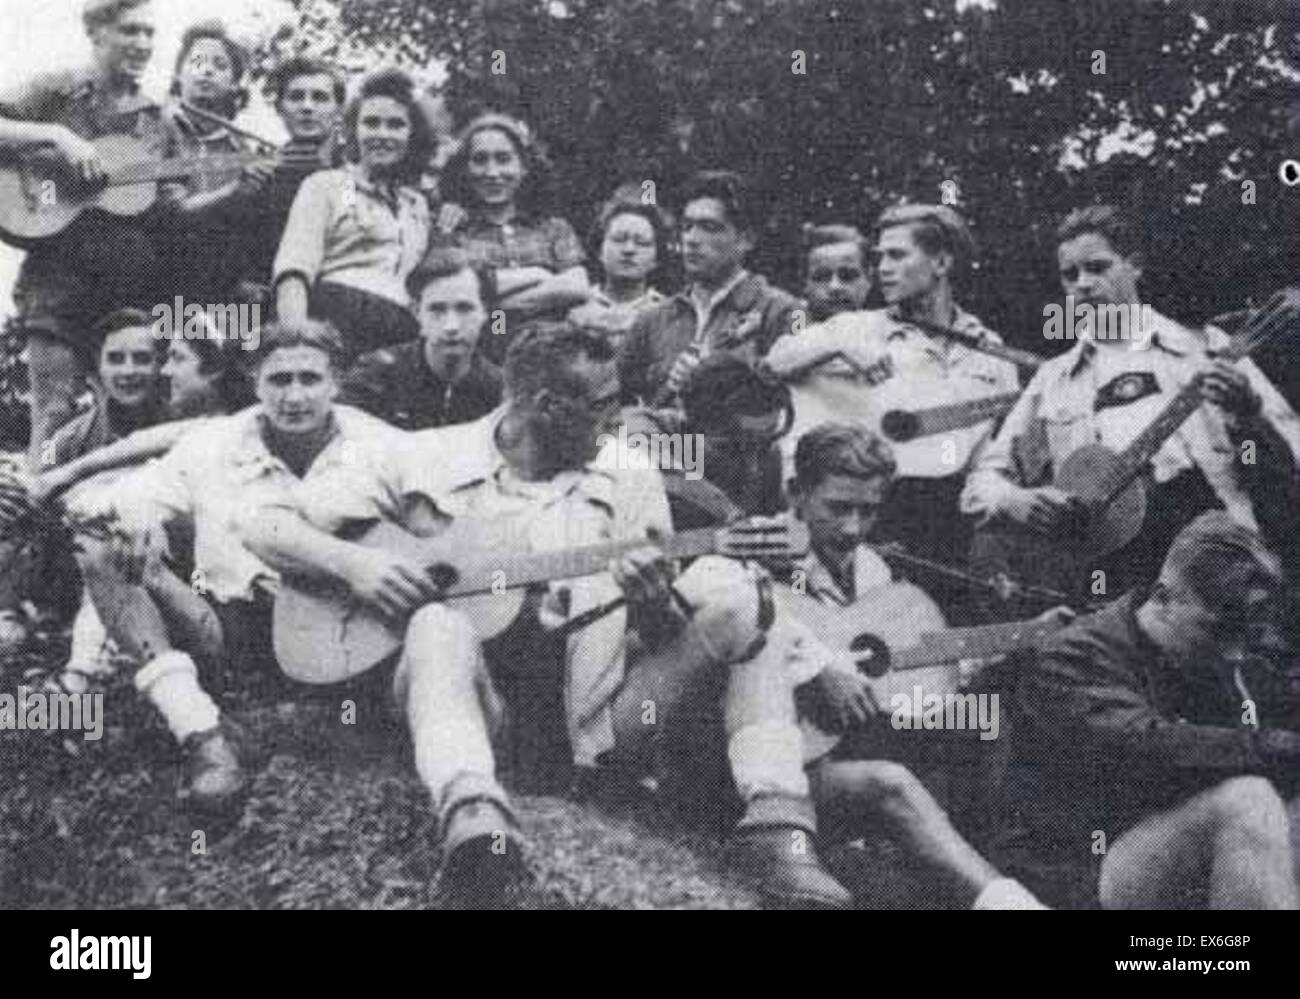 Edelweiss Pirates youth group in Nazi Germany. They emerged in western Germany out of the German Youth Movement of the late 1930s in response to the strict regimentation of the Hitler Youth.1938 Stock Photo